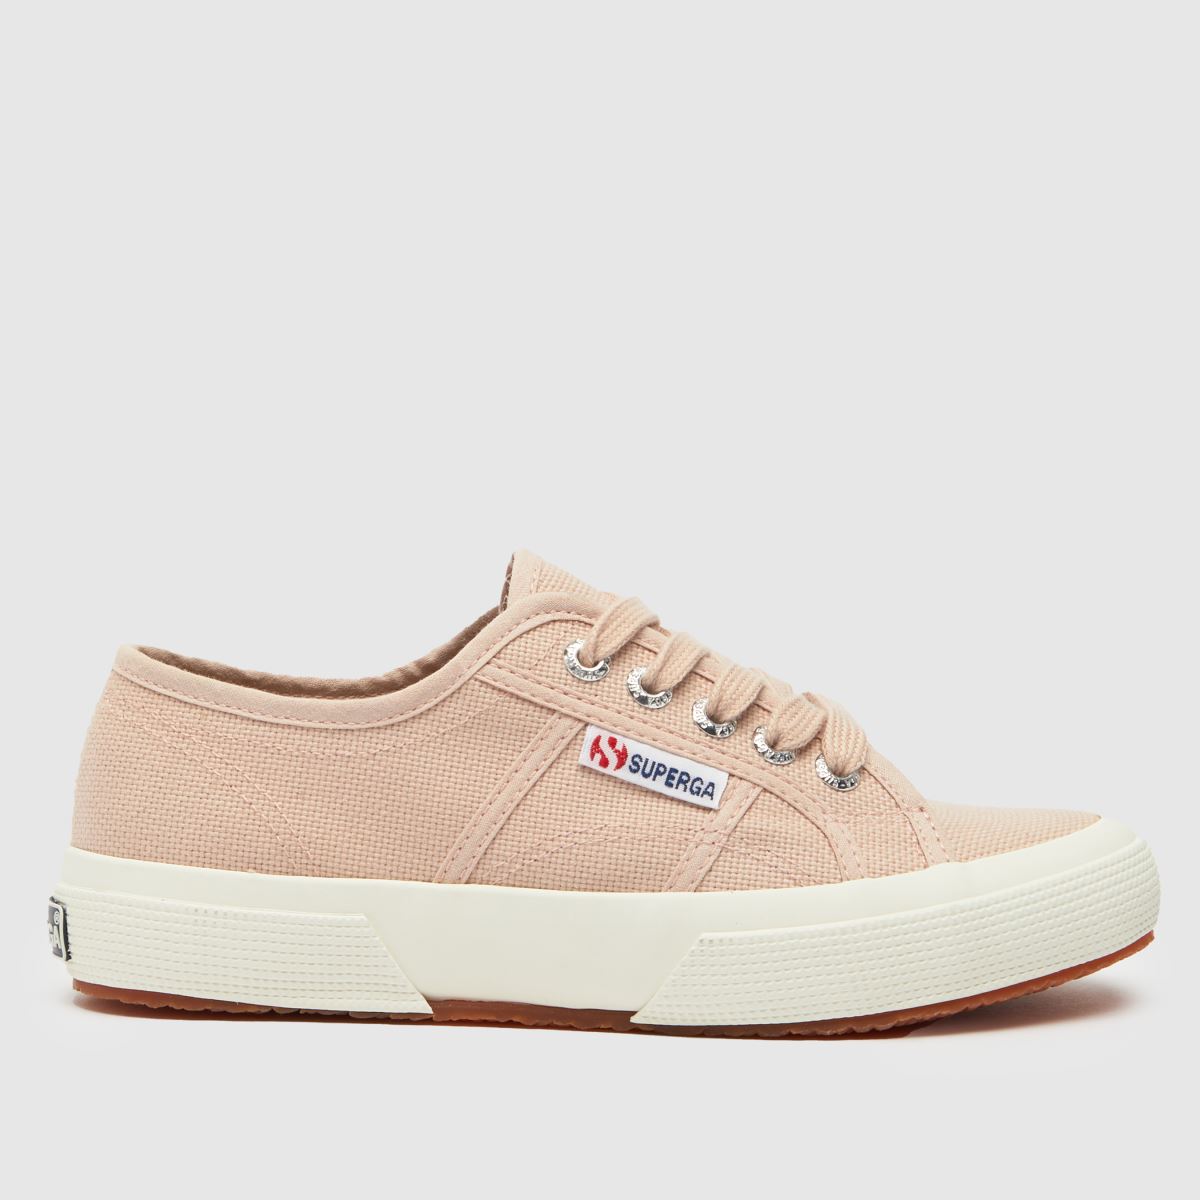 Superga pale pink 2750 classic Girls Youth Trainers